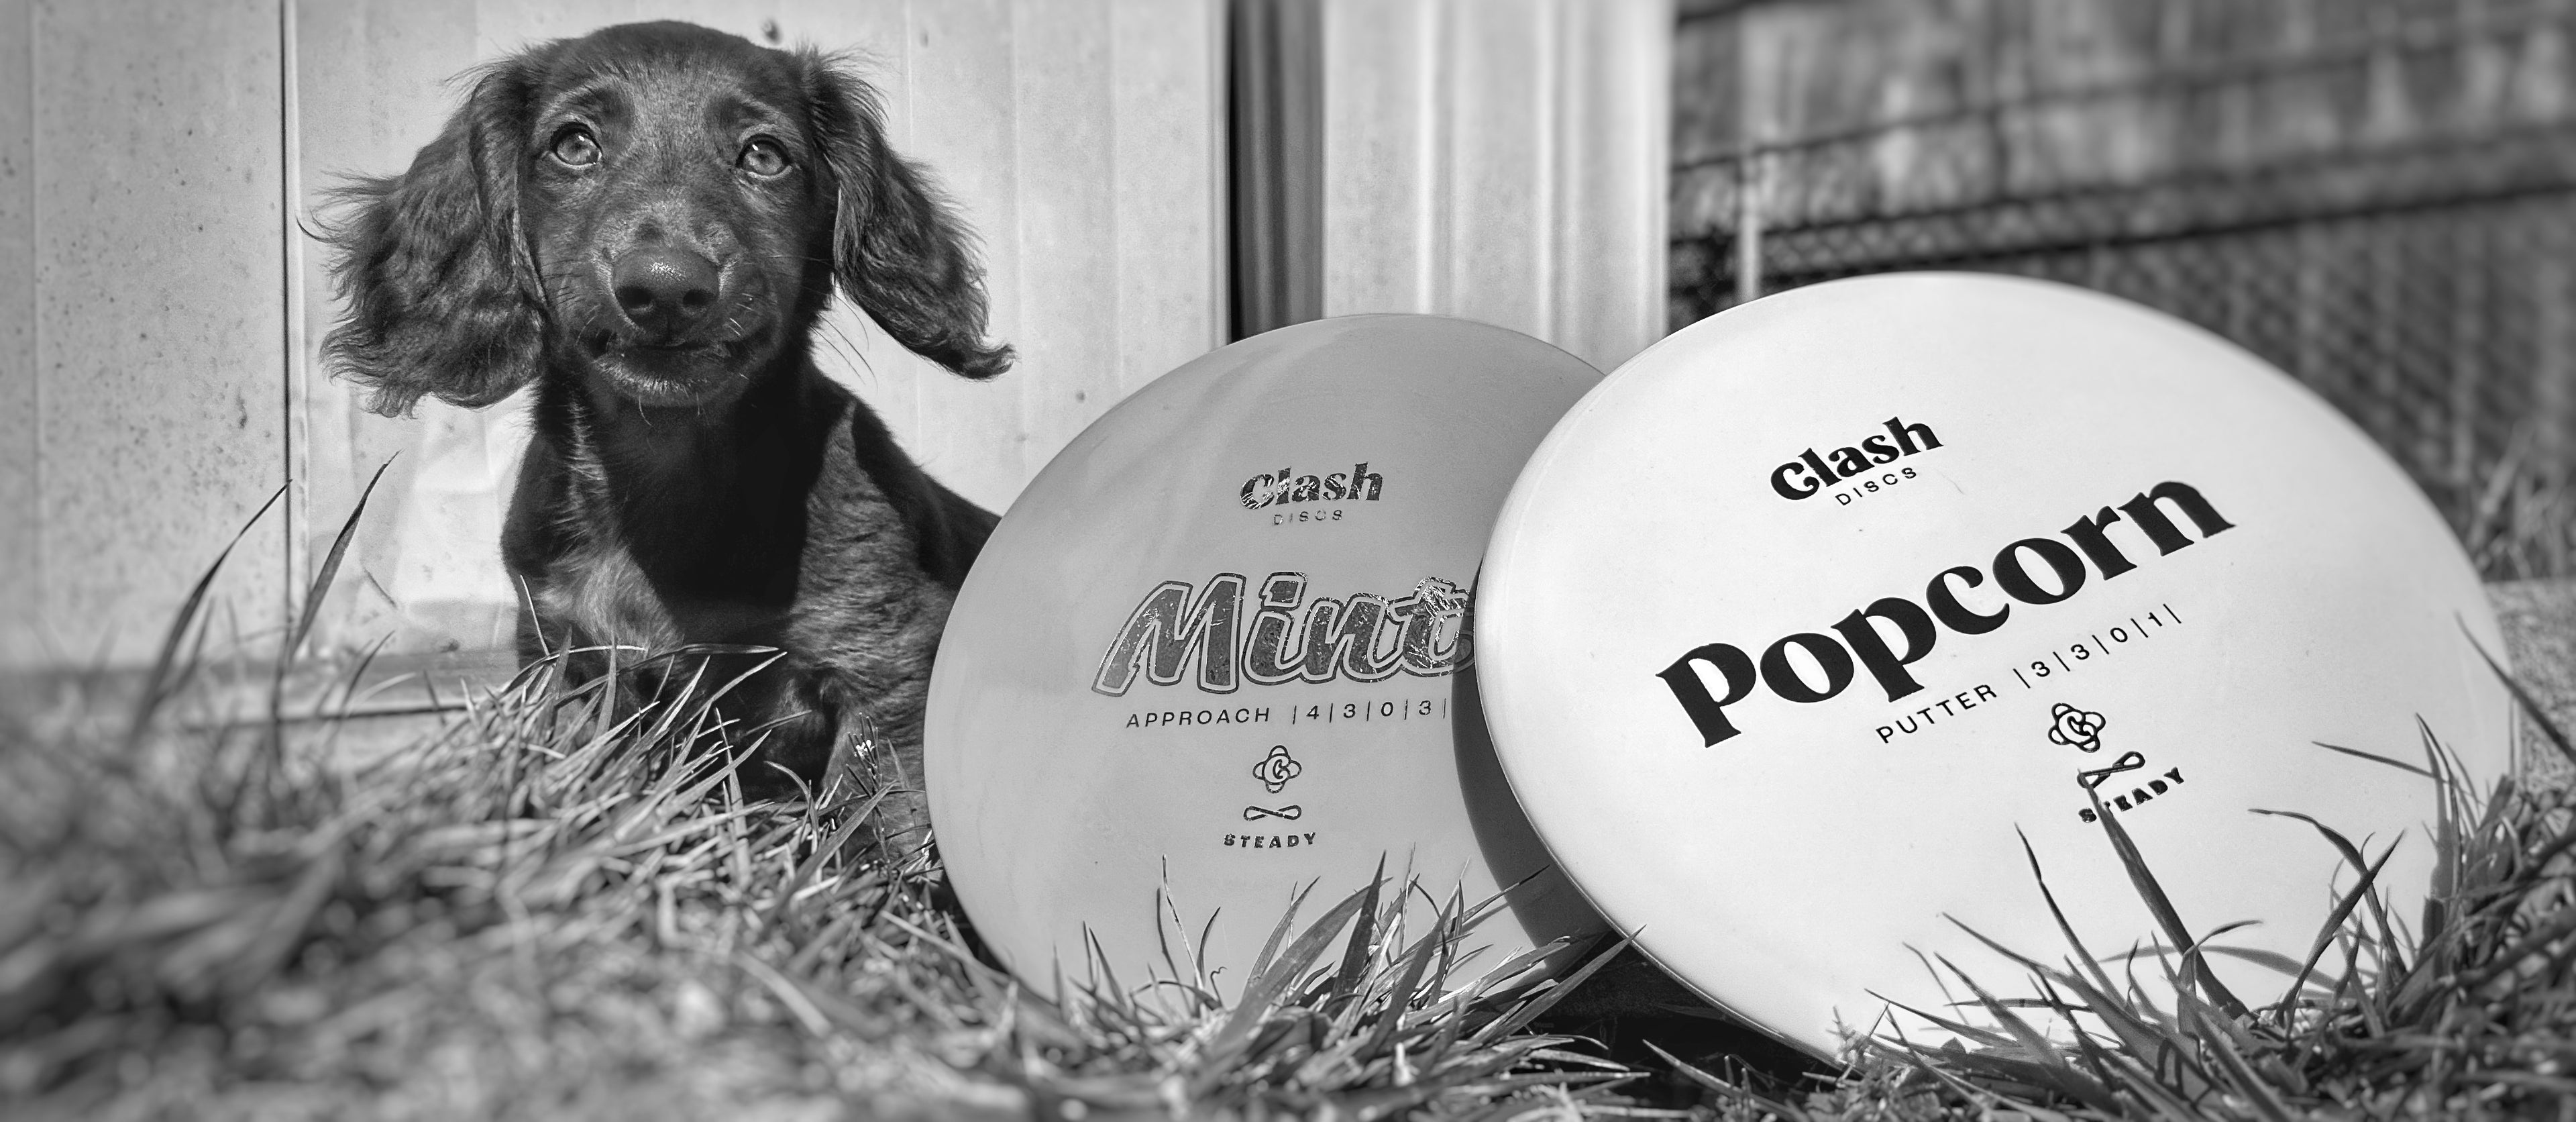 Black and White photo of Louie the Dachshund posing with two discs from Clash Discs.